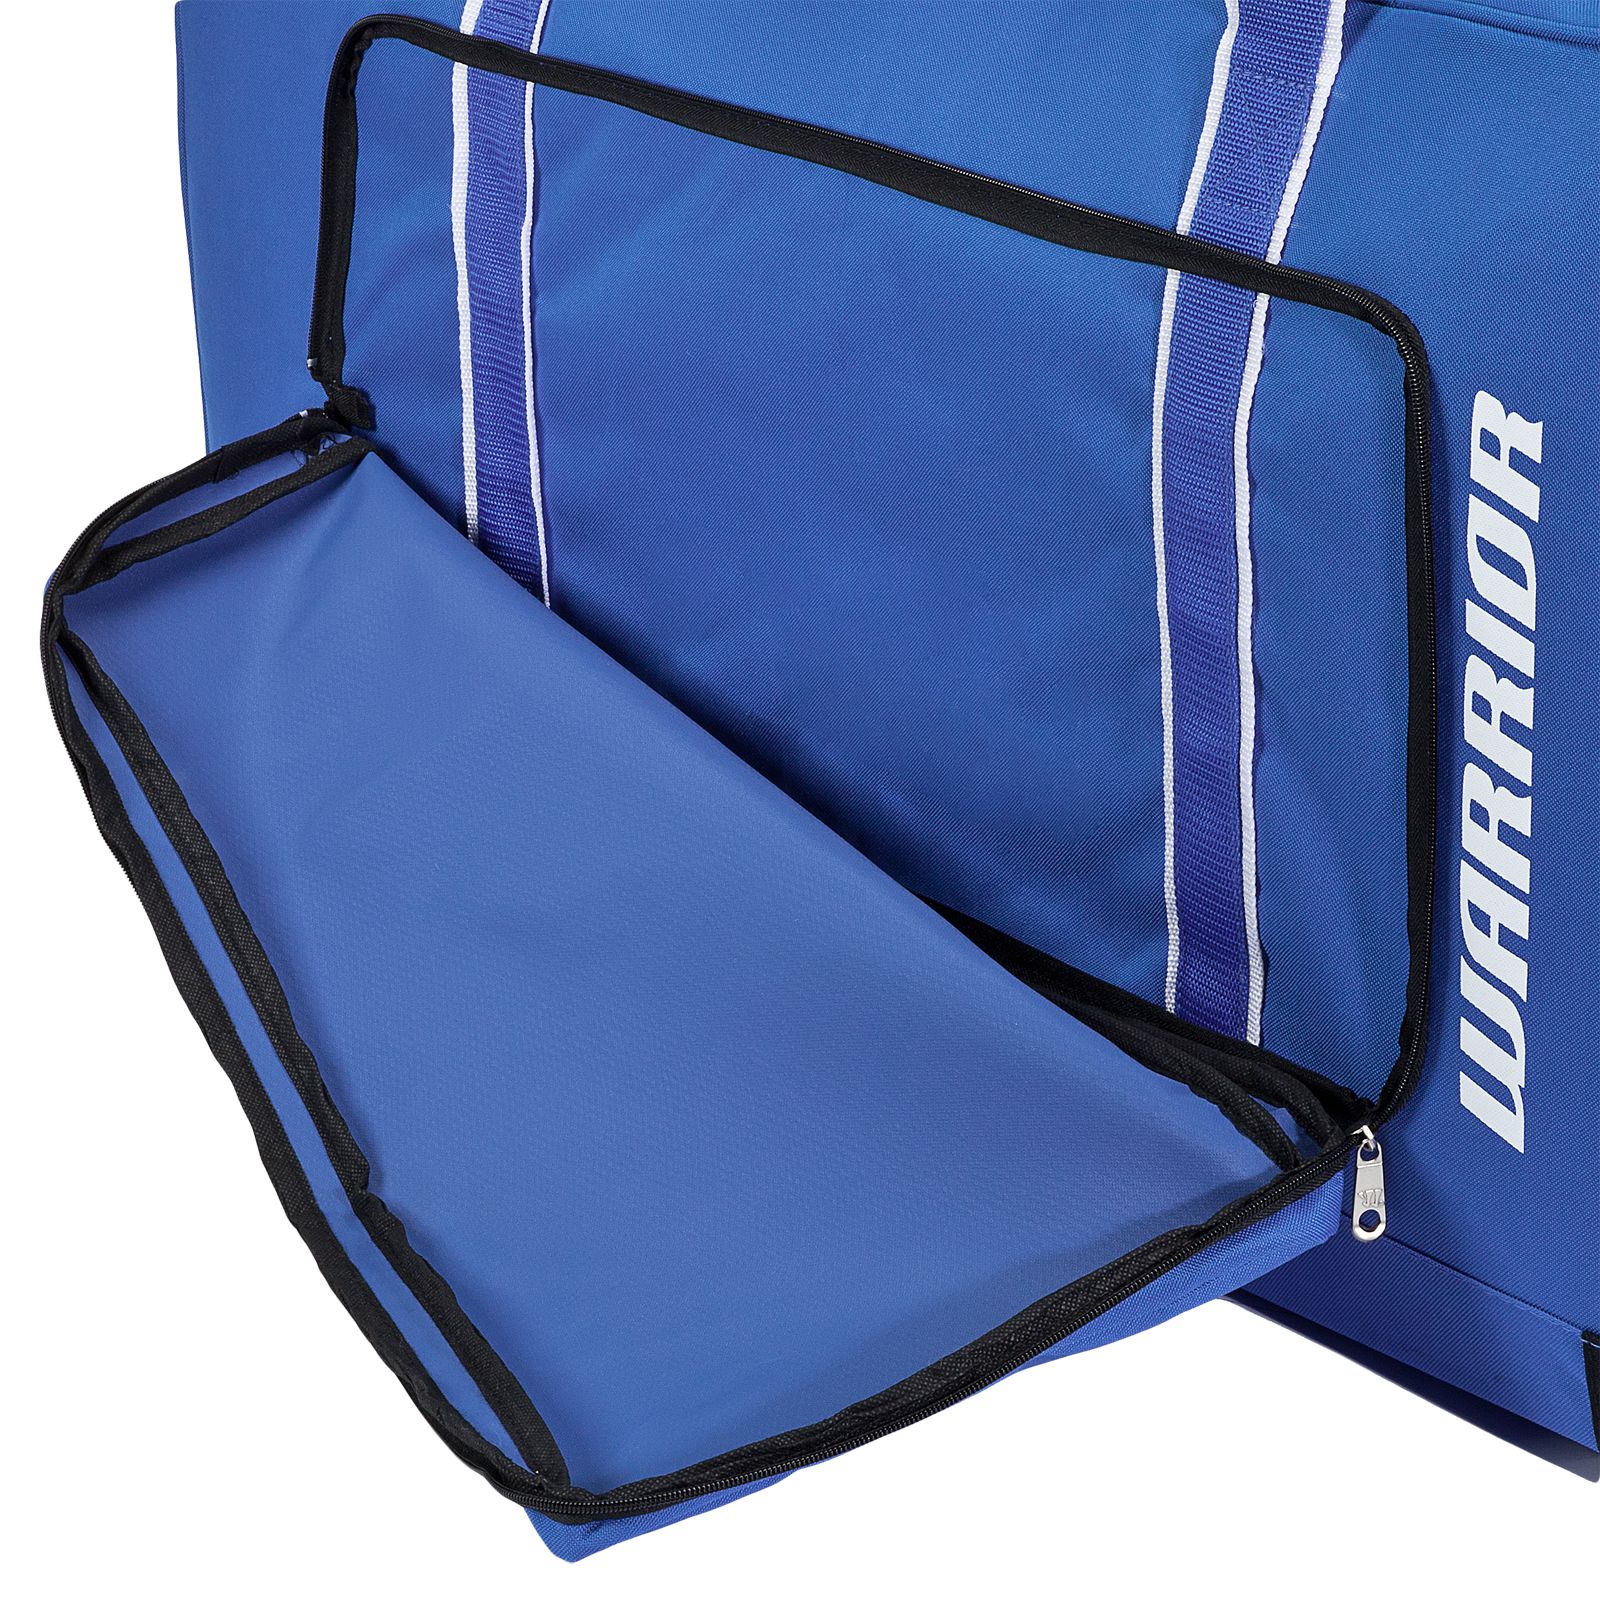 Team Goalie Duffel Bag, Royal Blue with White image number 3